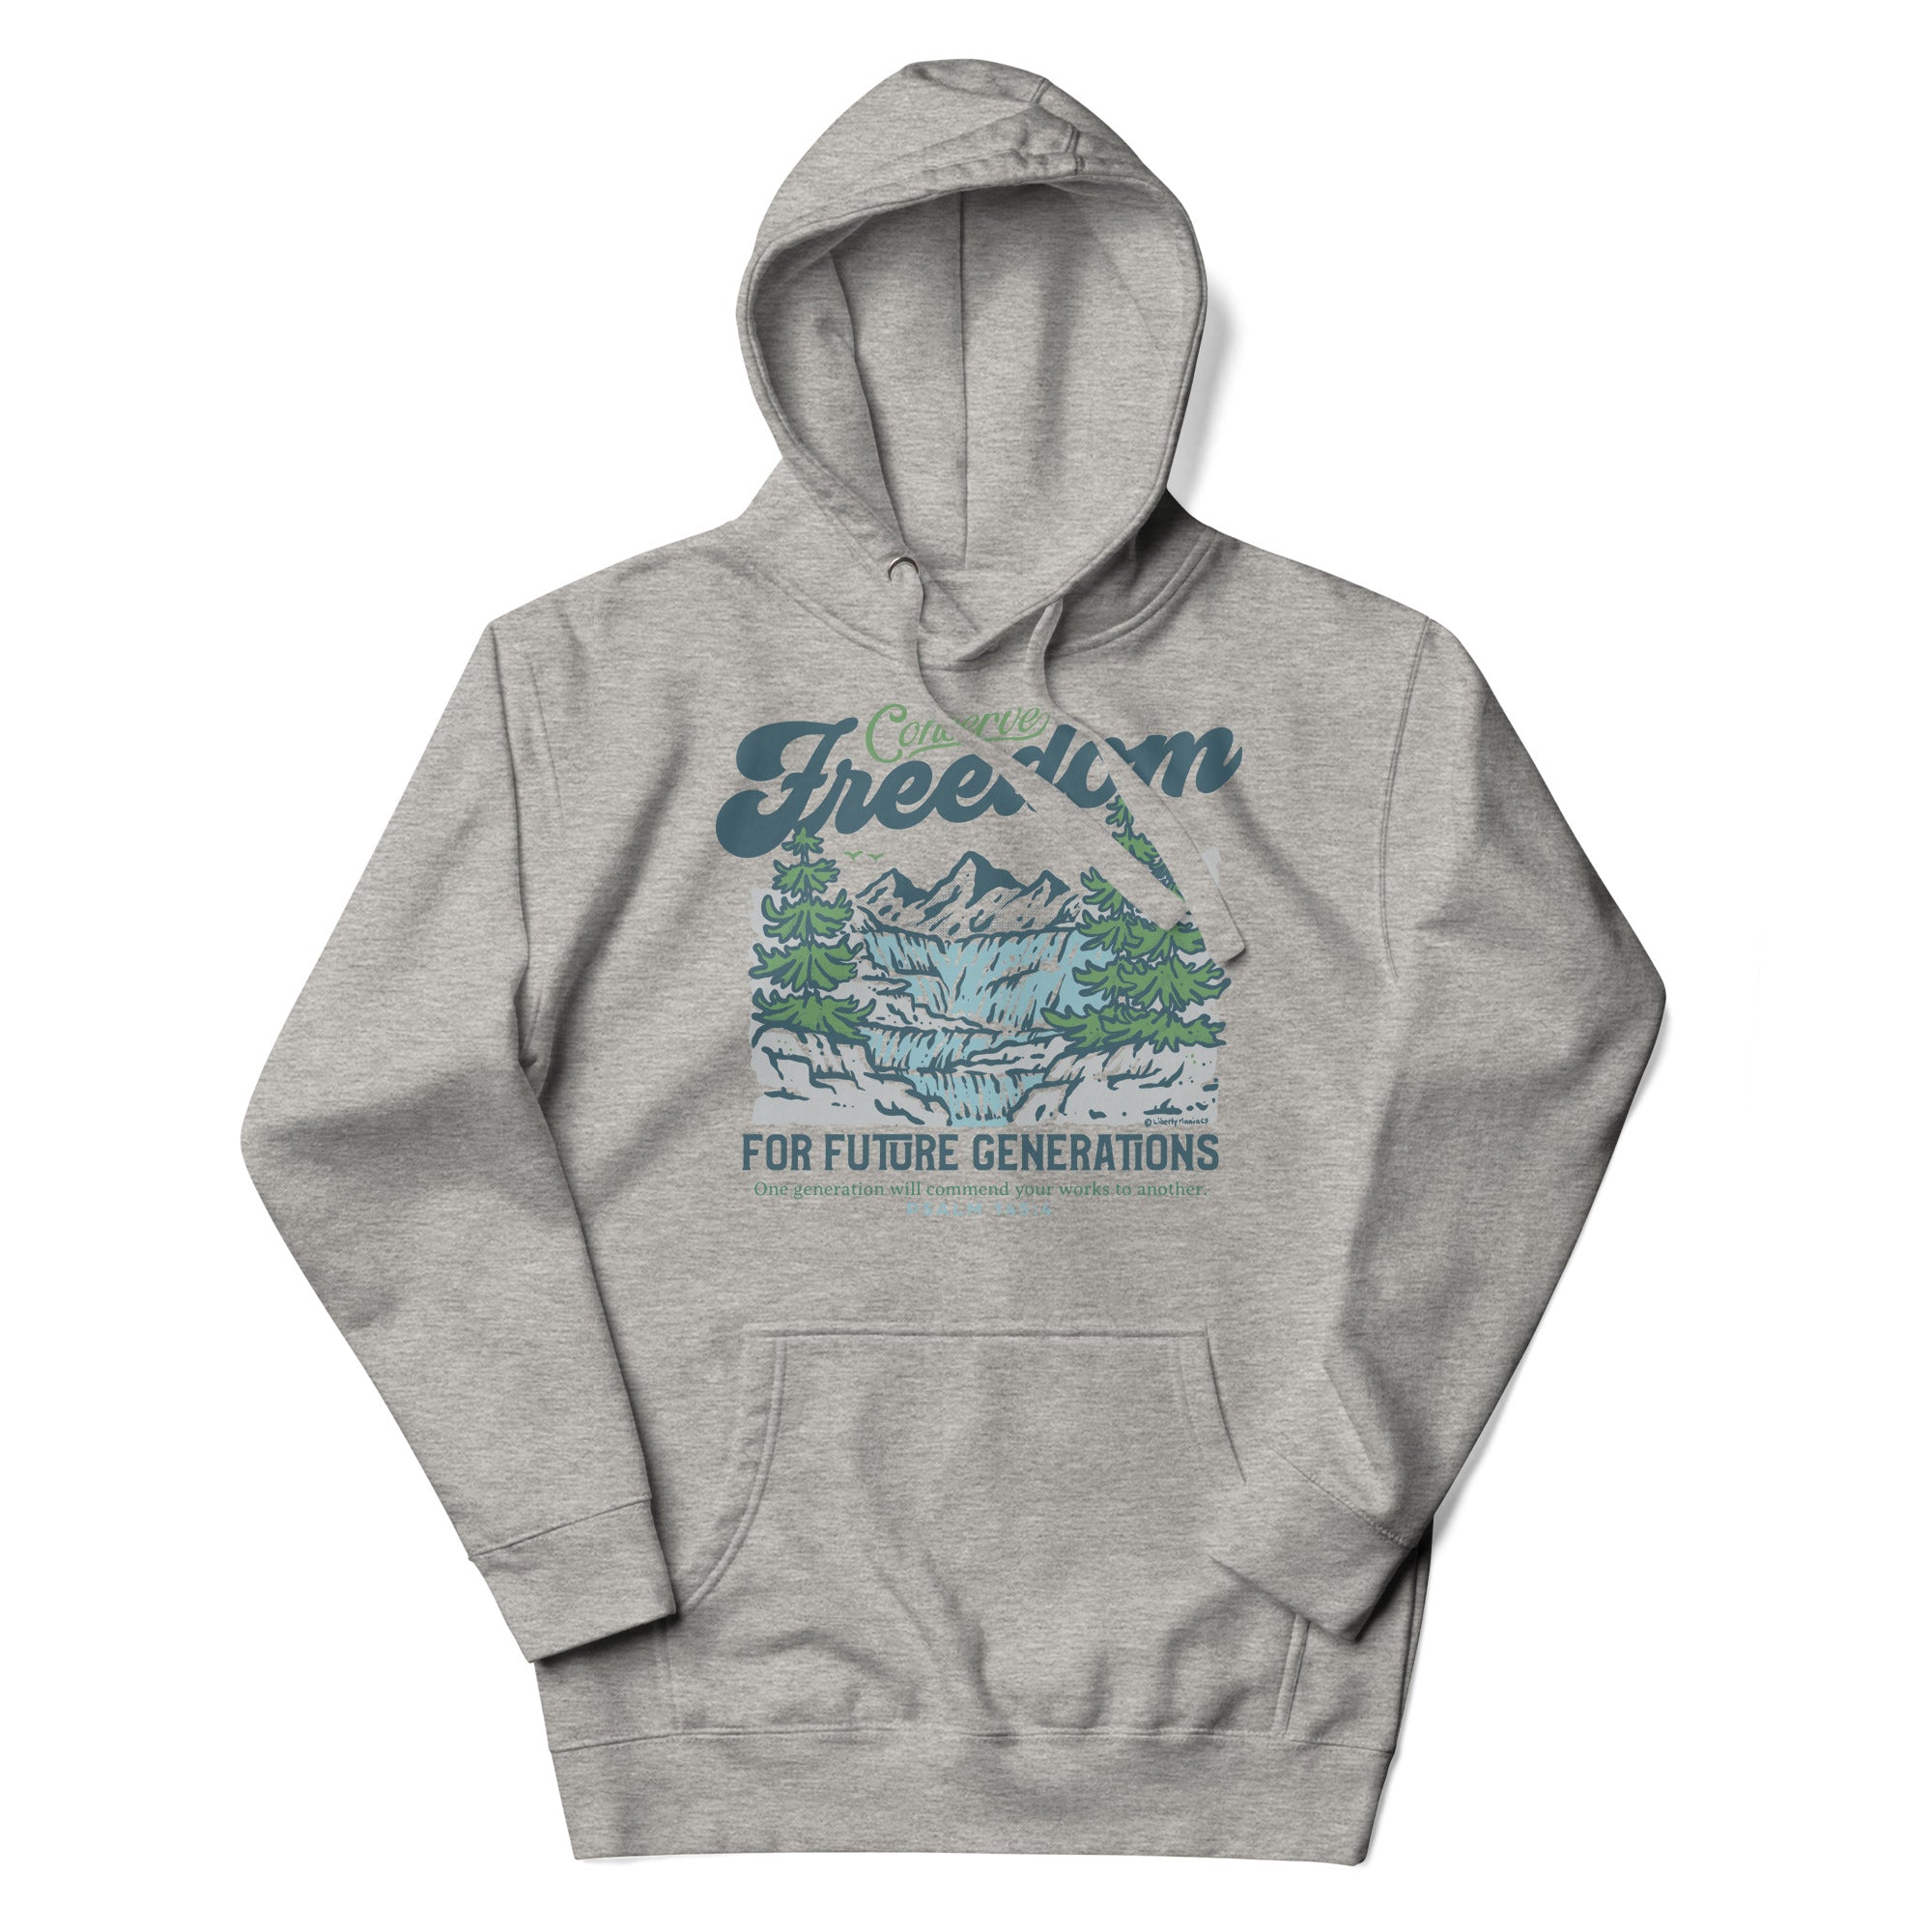 Conserve Freedom for Future Generations Conserve Freedom Hoodie